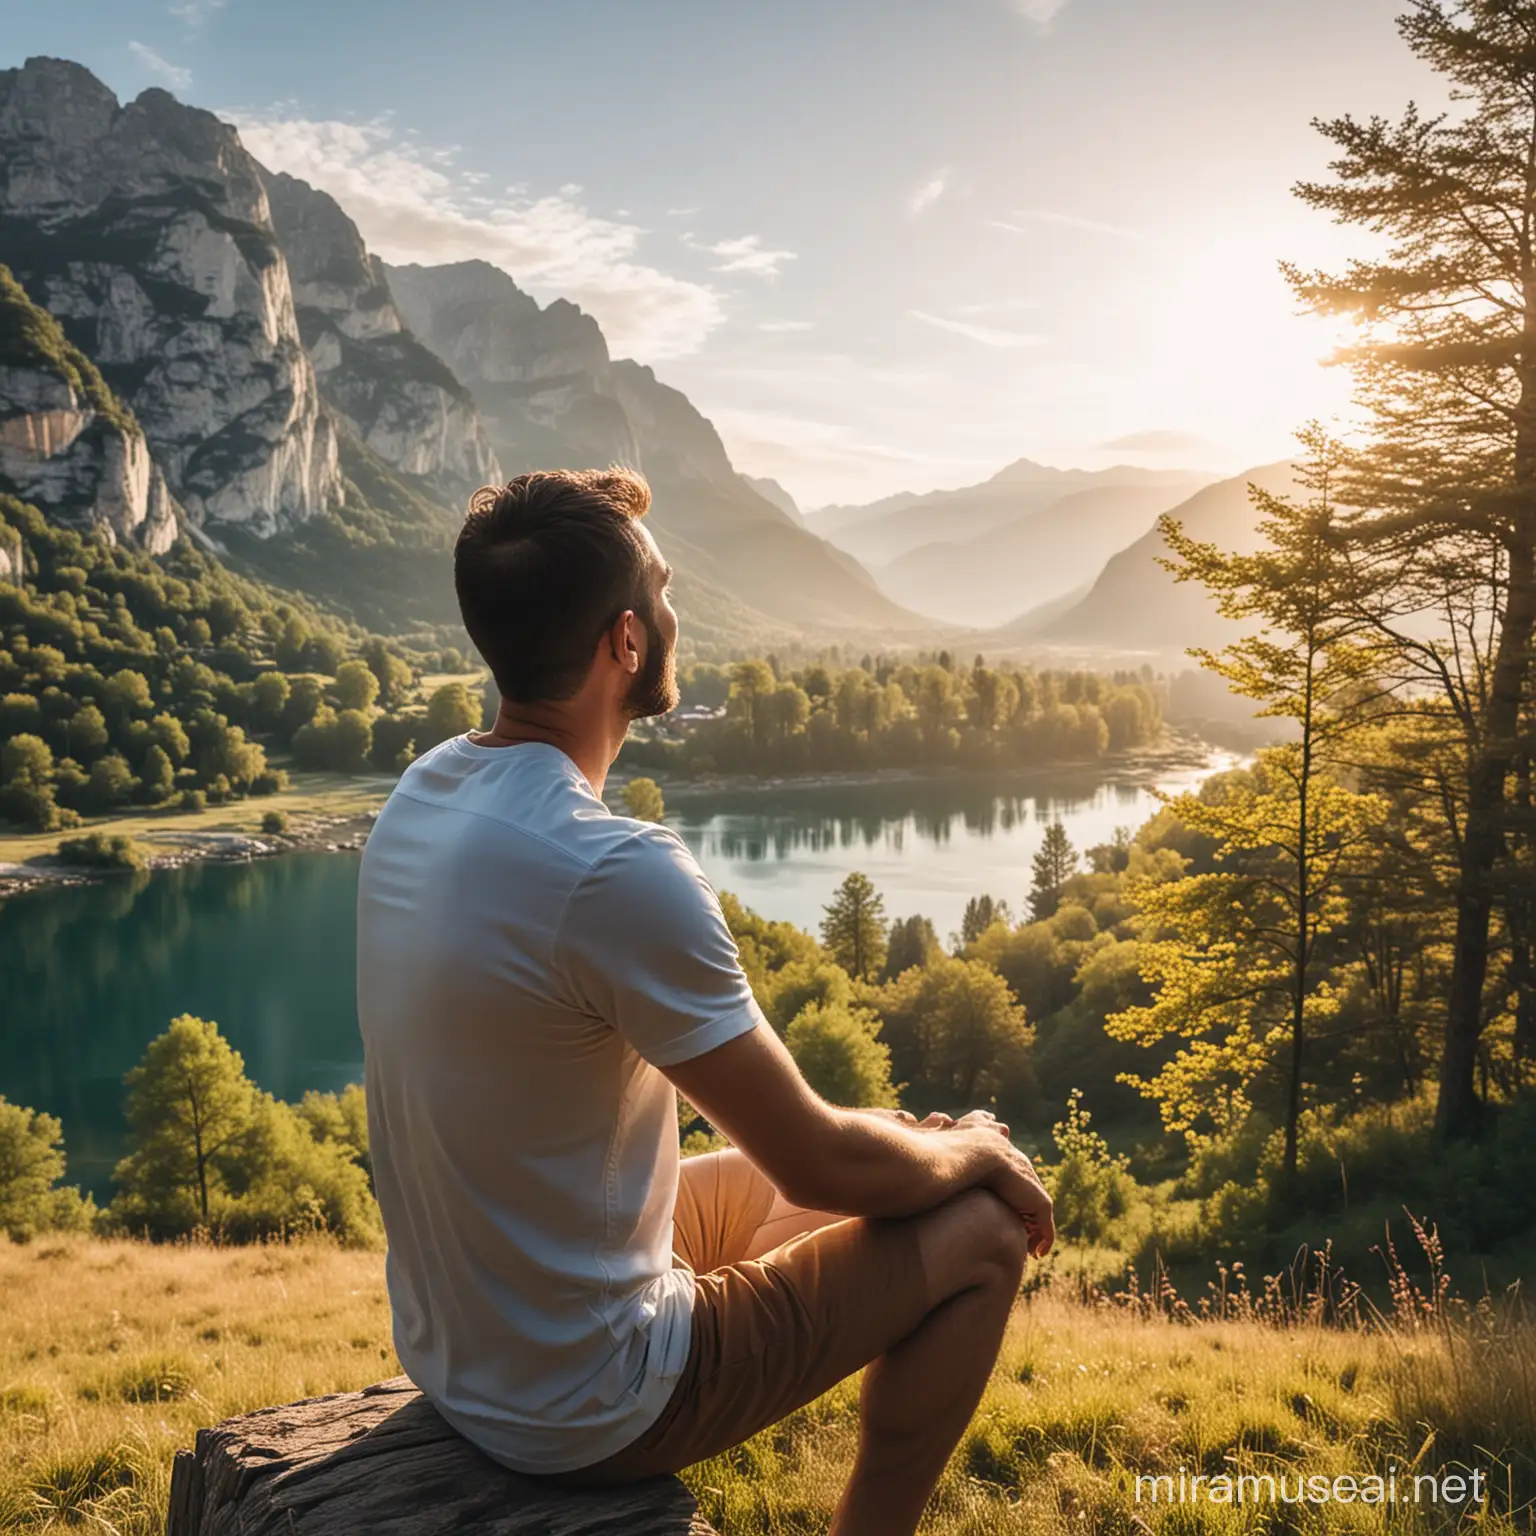 Man Relaxing with Gift Amidst Scenic Natural Landscape